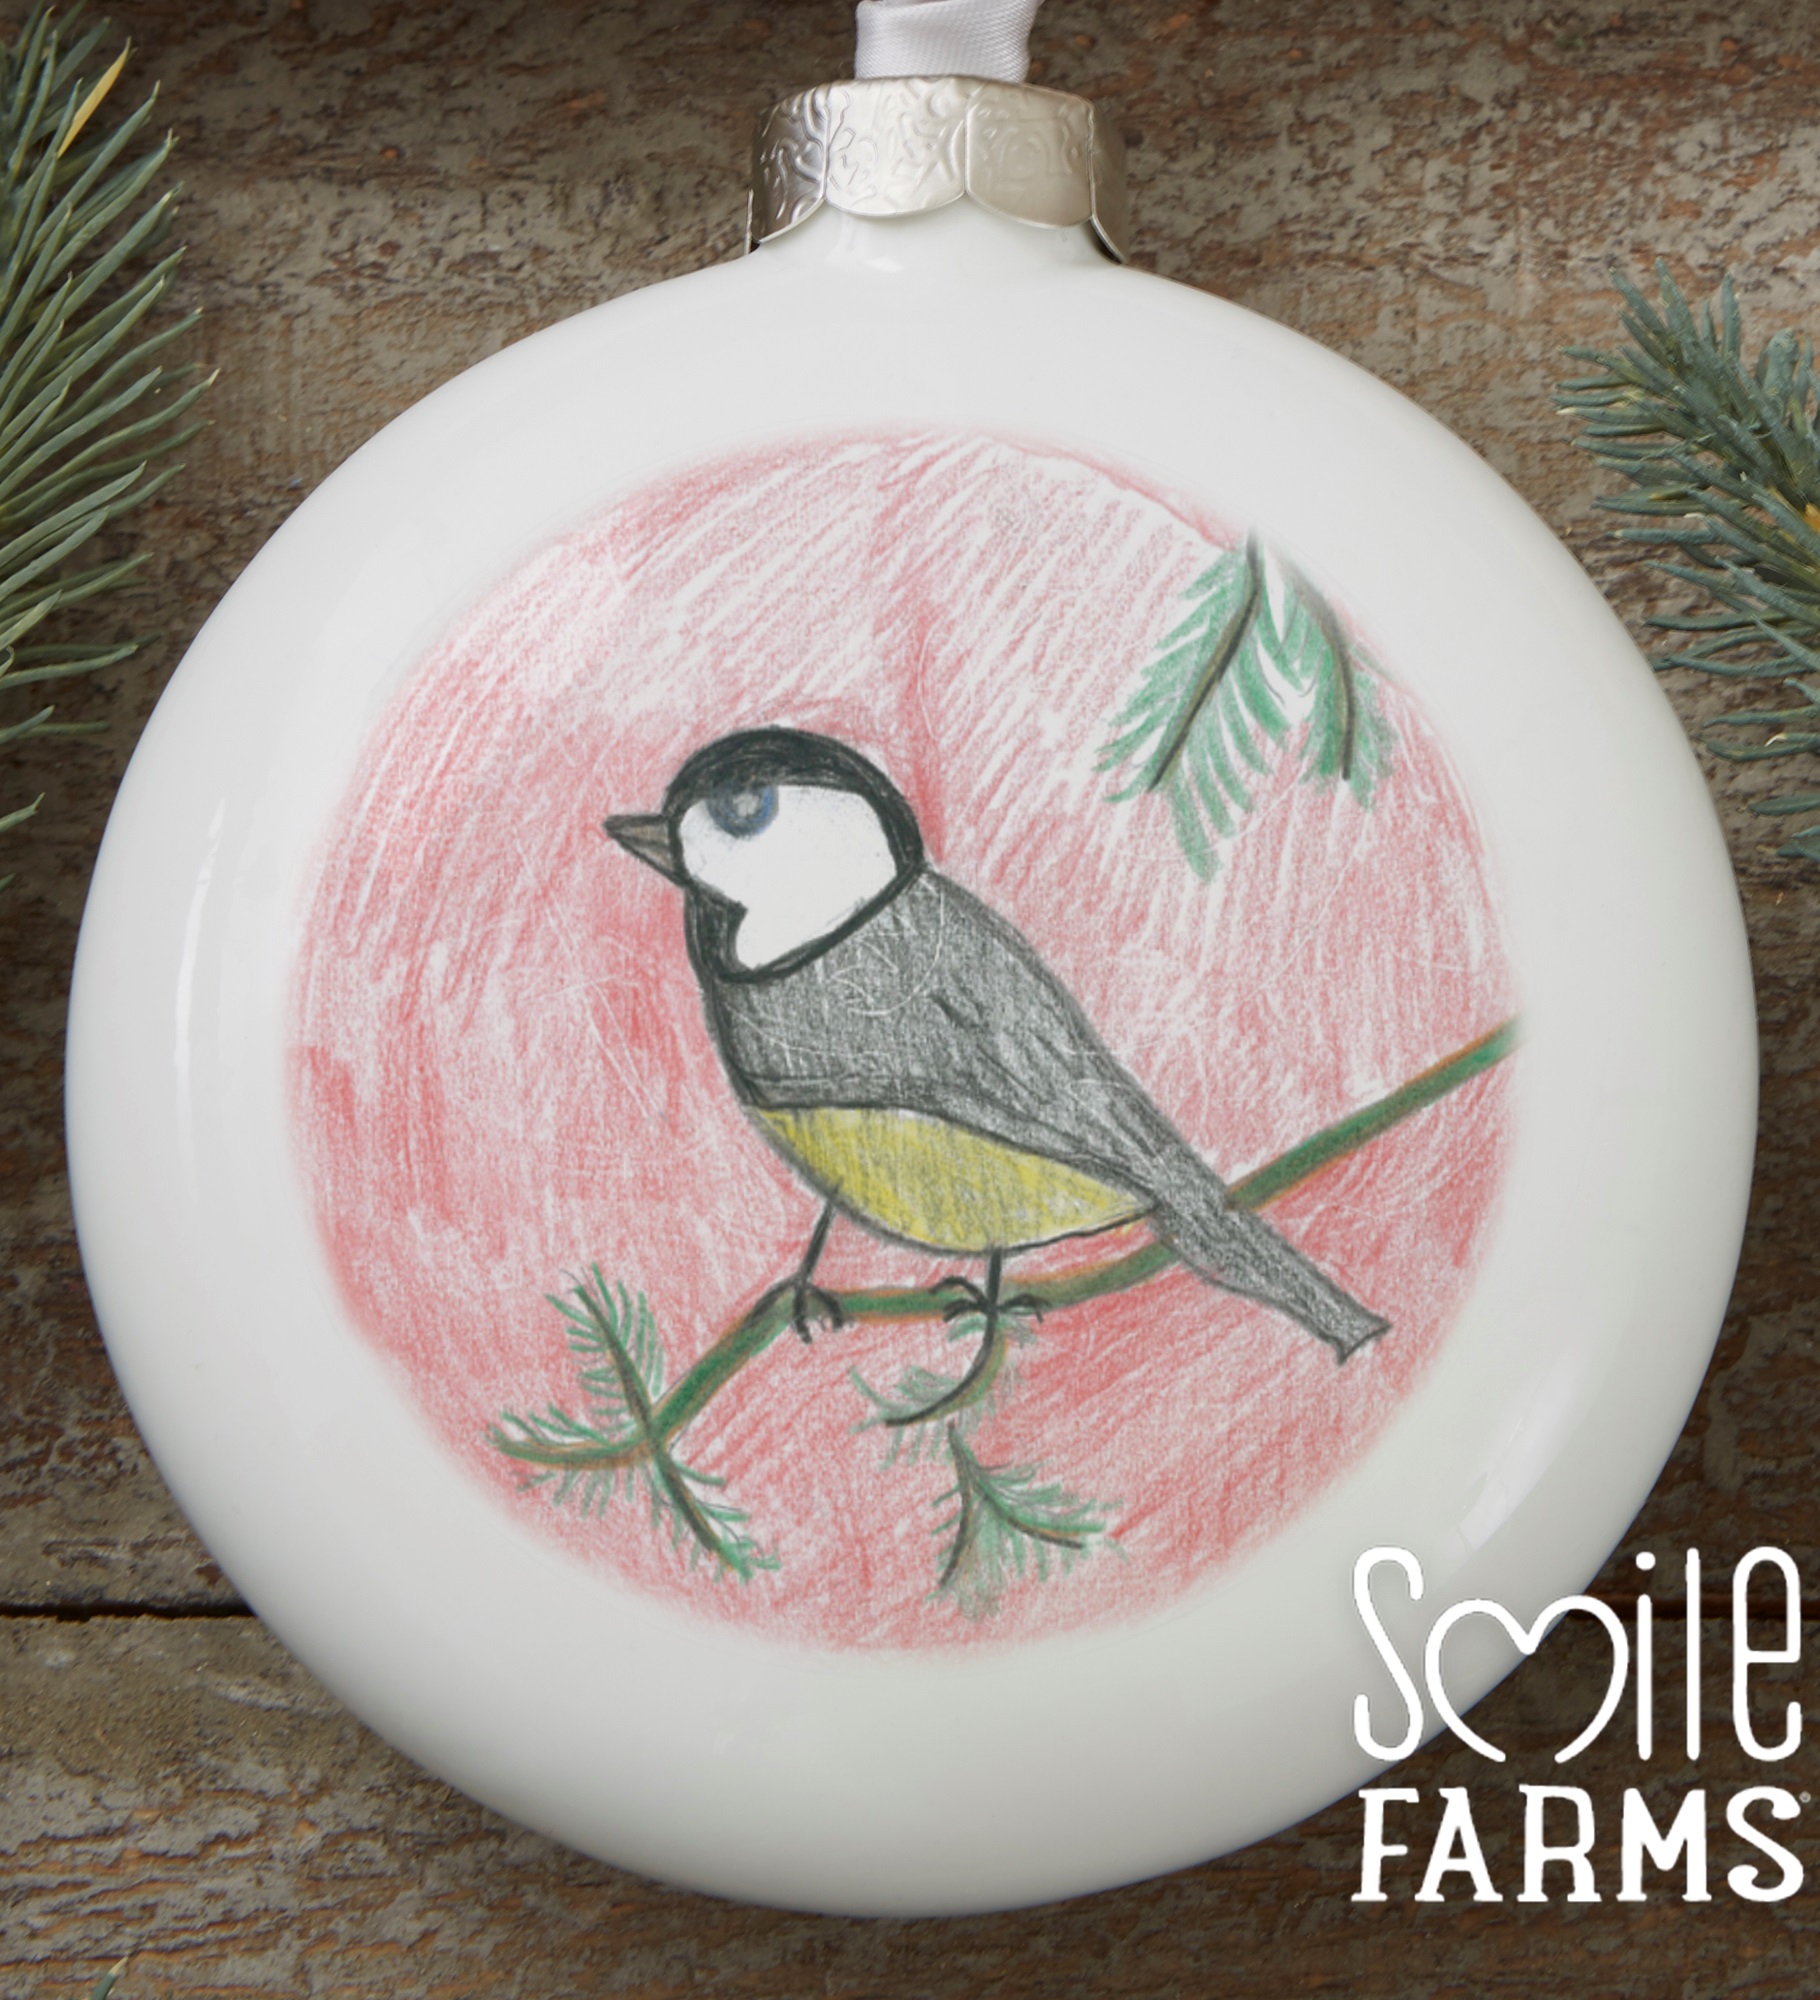 Perched on a Pine Personalized Smile Farms Deluxe Slim Globe Ornament